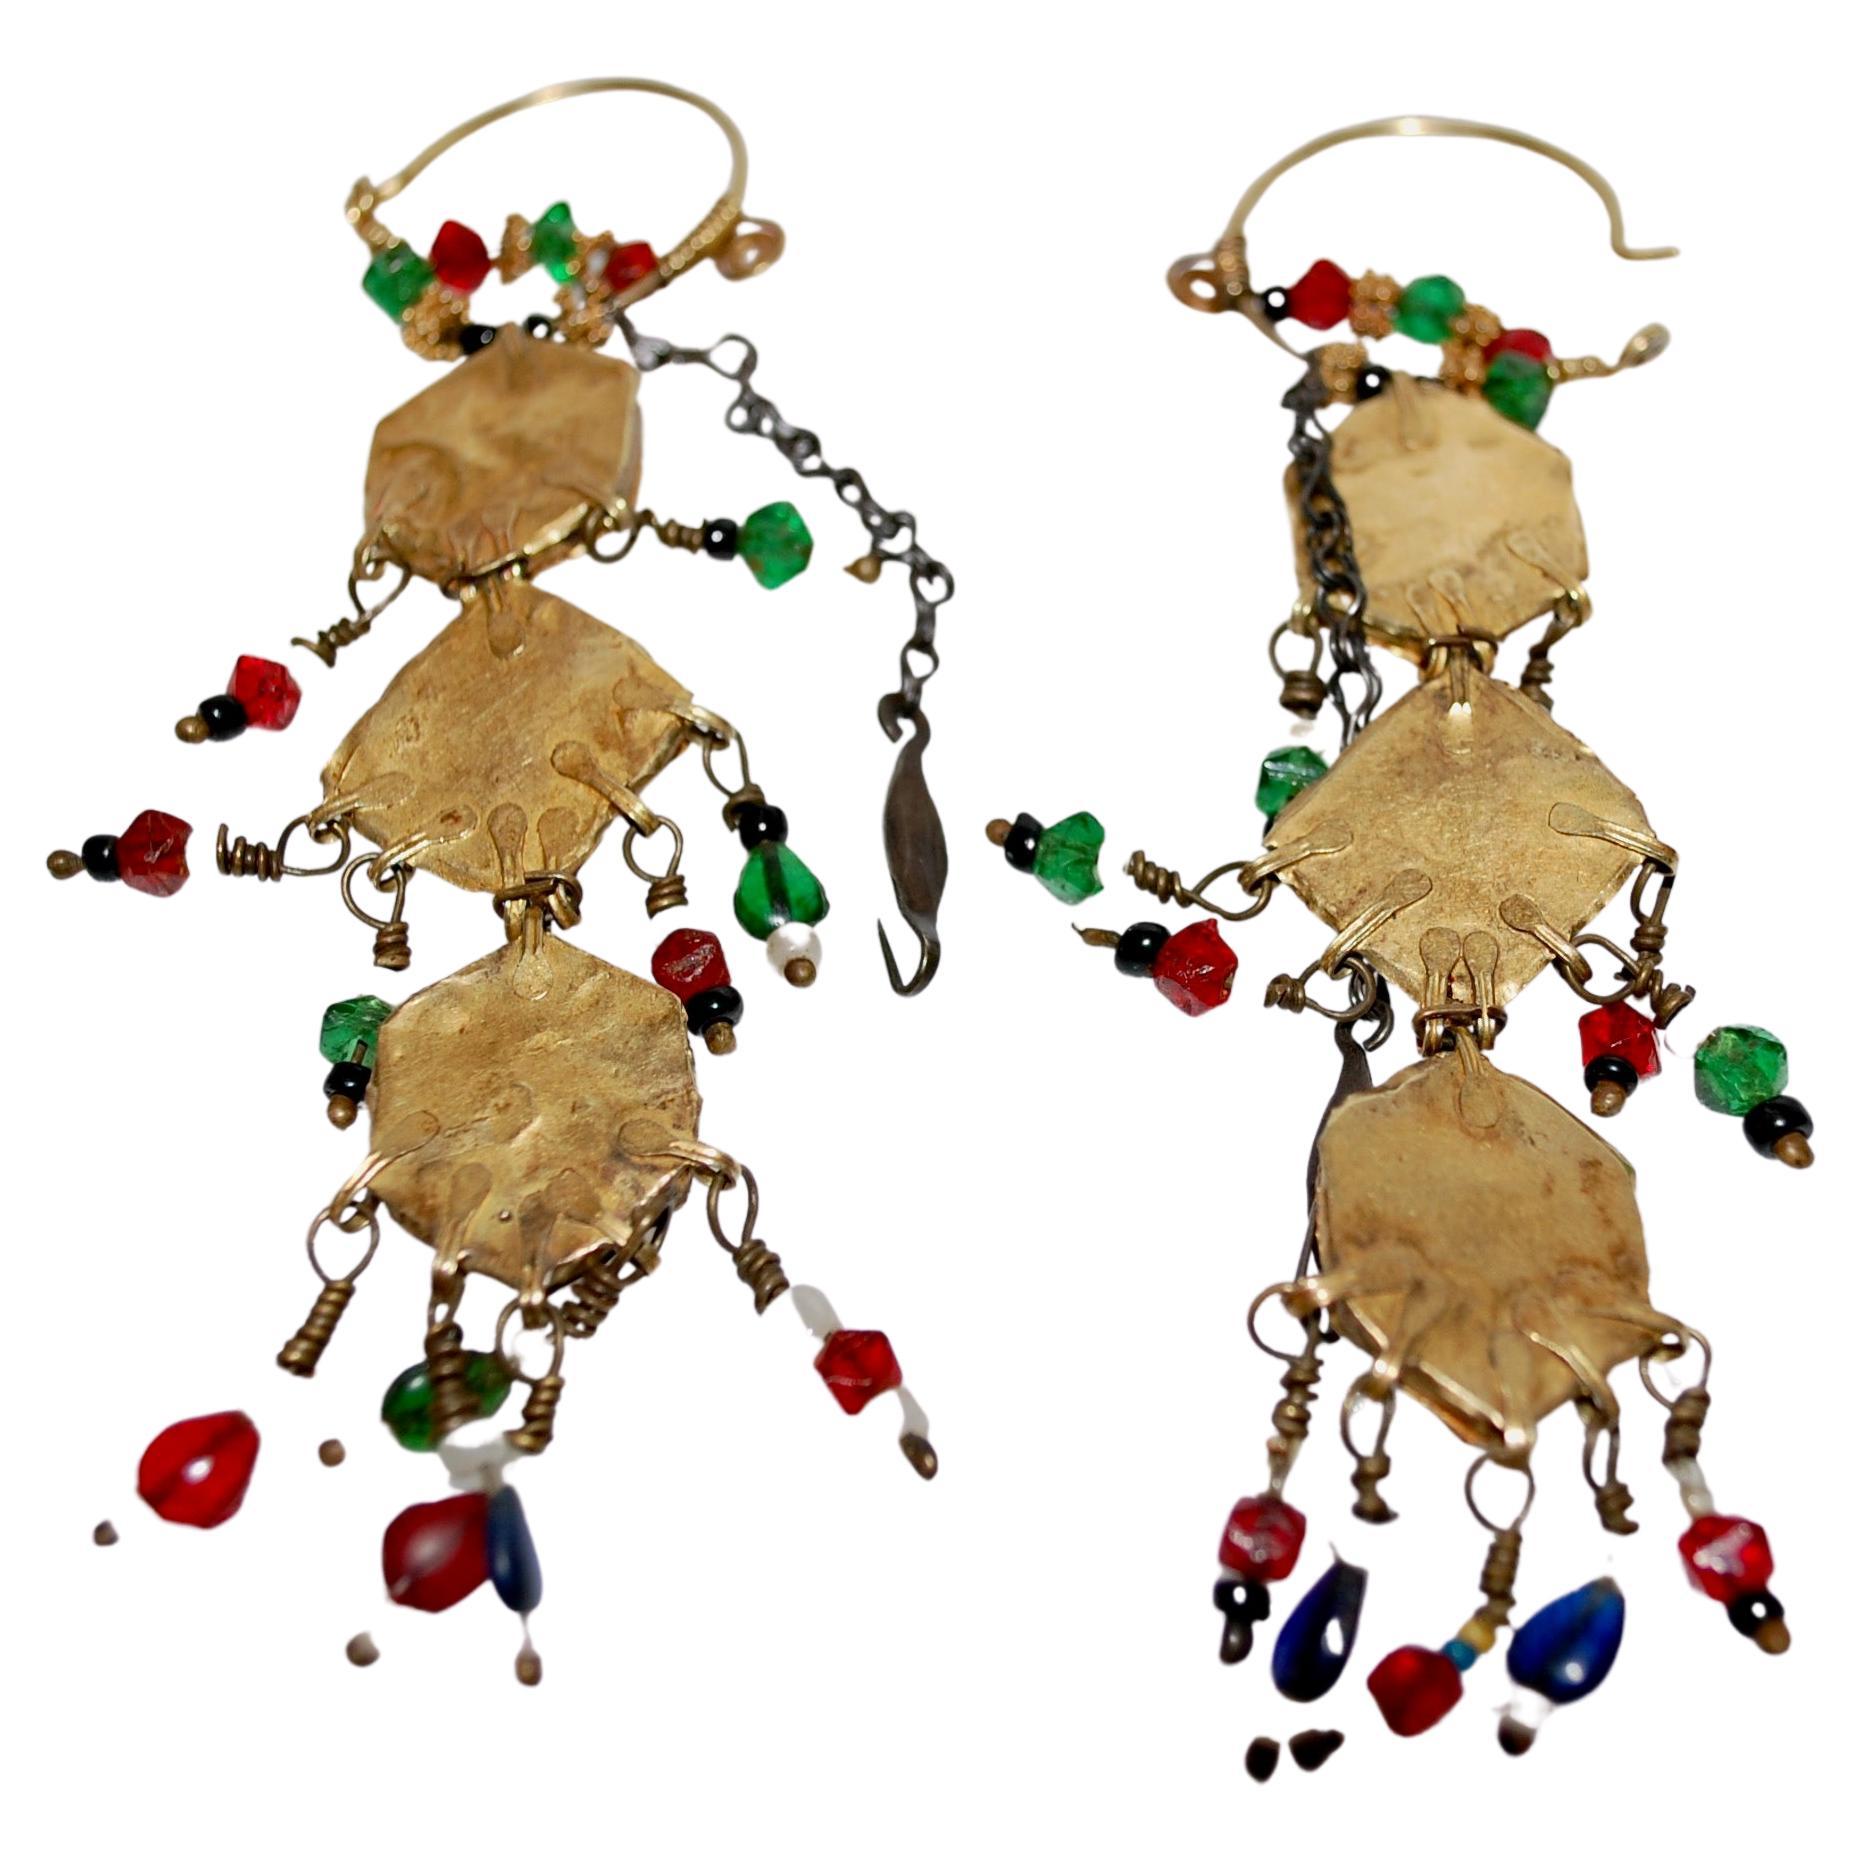 Rare Qajar 19th Century Persian 22k yellow gold and gemstones dangle bridal earrings. 
These fabules long earrings are hand crafted in 22 carat gold decorated with precious and semi precious stones, turquoise, rubies, emeralds, lapis lazuli.  Stones